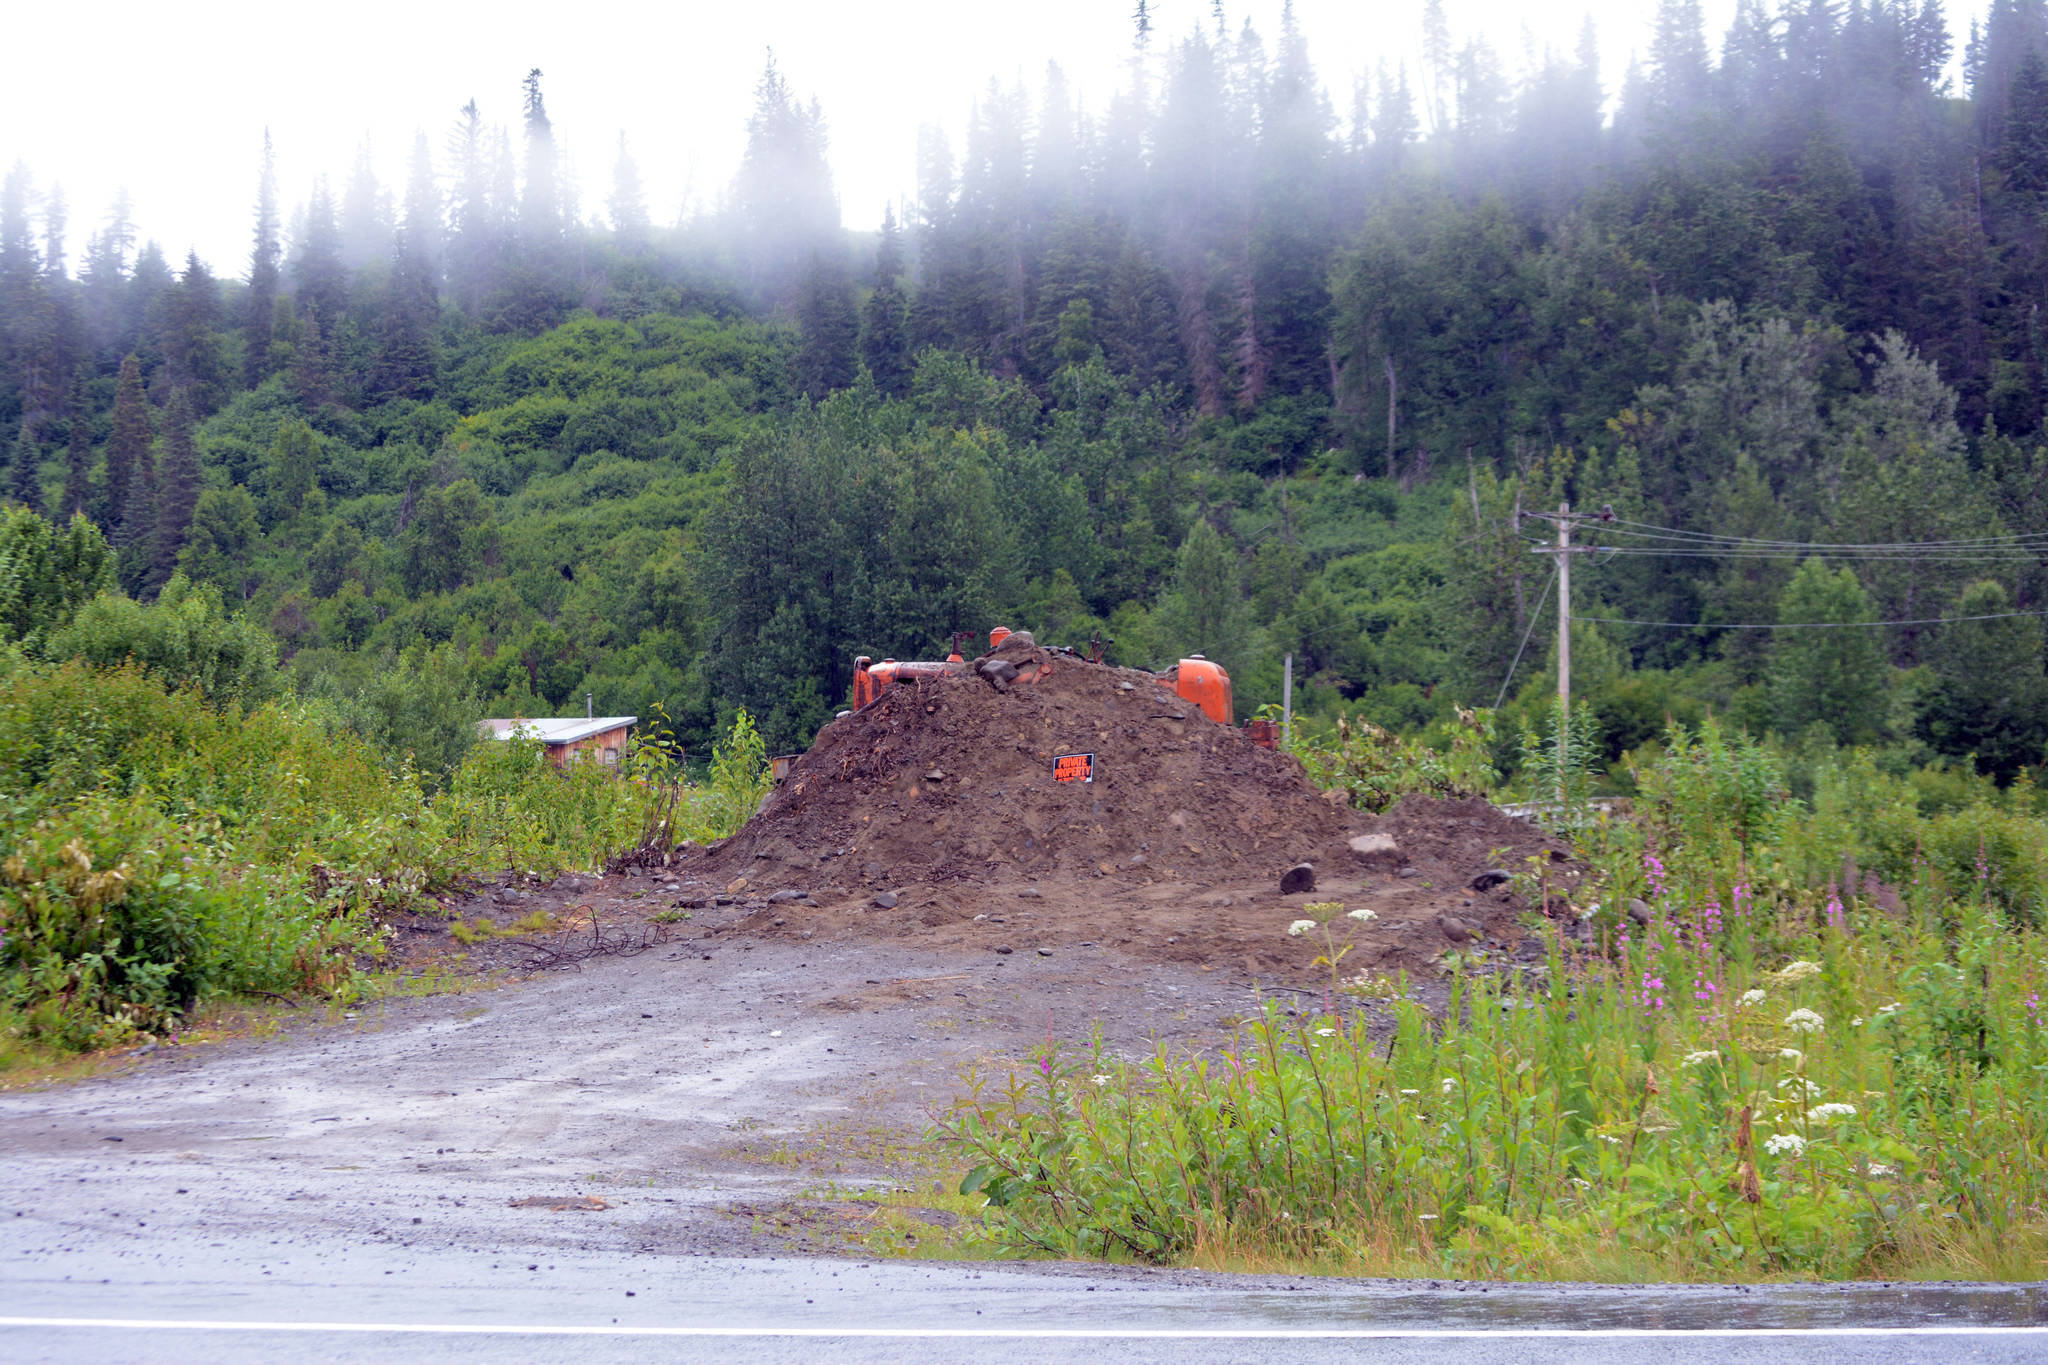 A bulldozer and a pile of gravel block the entrance to a bridge leading to the Glanville homestead on July 23, 2018, near Mile 164 Sterling Highway. Dwight and Diana Glanville filed eviction proceedings against Keith Evans, and in a hearing on July 23, Evans agreed to pack up his possessions no later than Aug. 6, at which time the Glanvilles will open the road so he can leave. (Photo by Michael Armstrong/Homer News)